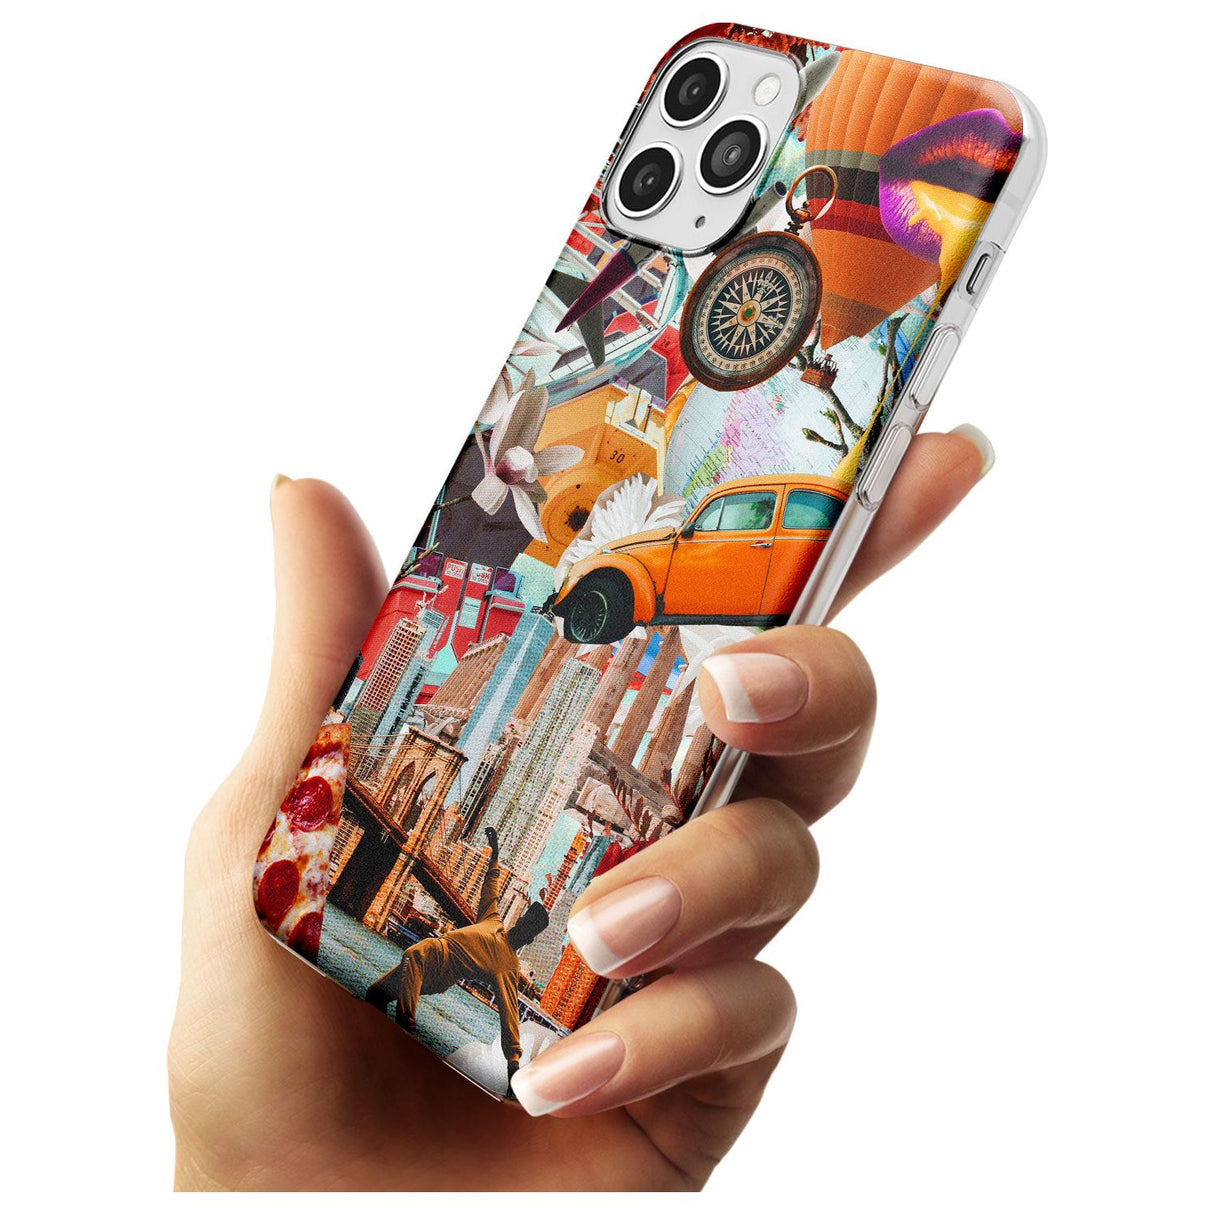 Vintage Collage: New York Mix Slim TPU Phone Case for iPhone 11 Pro Max